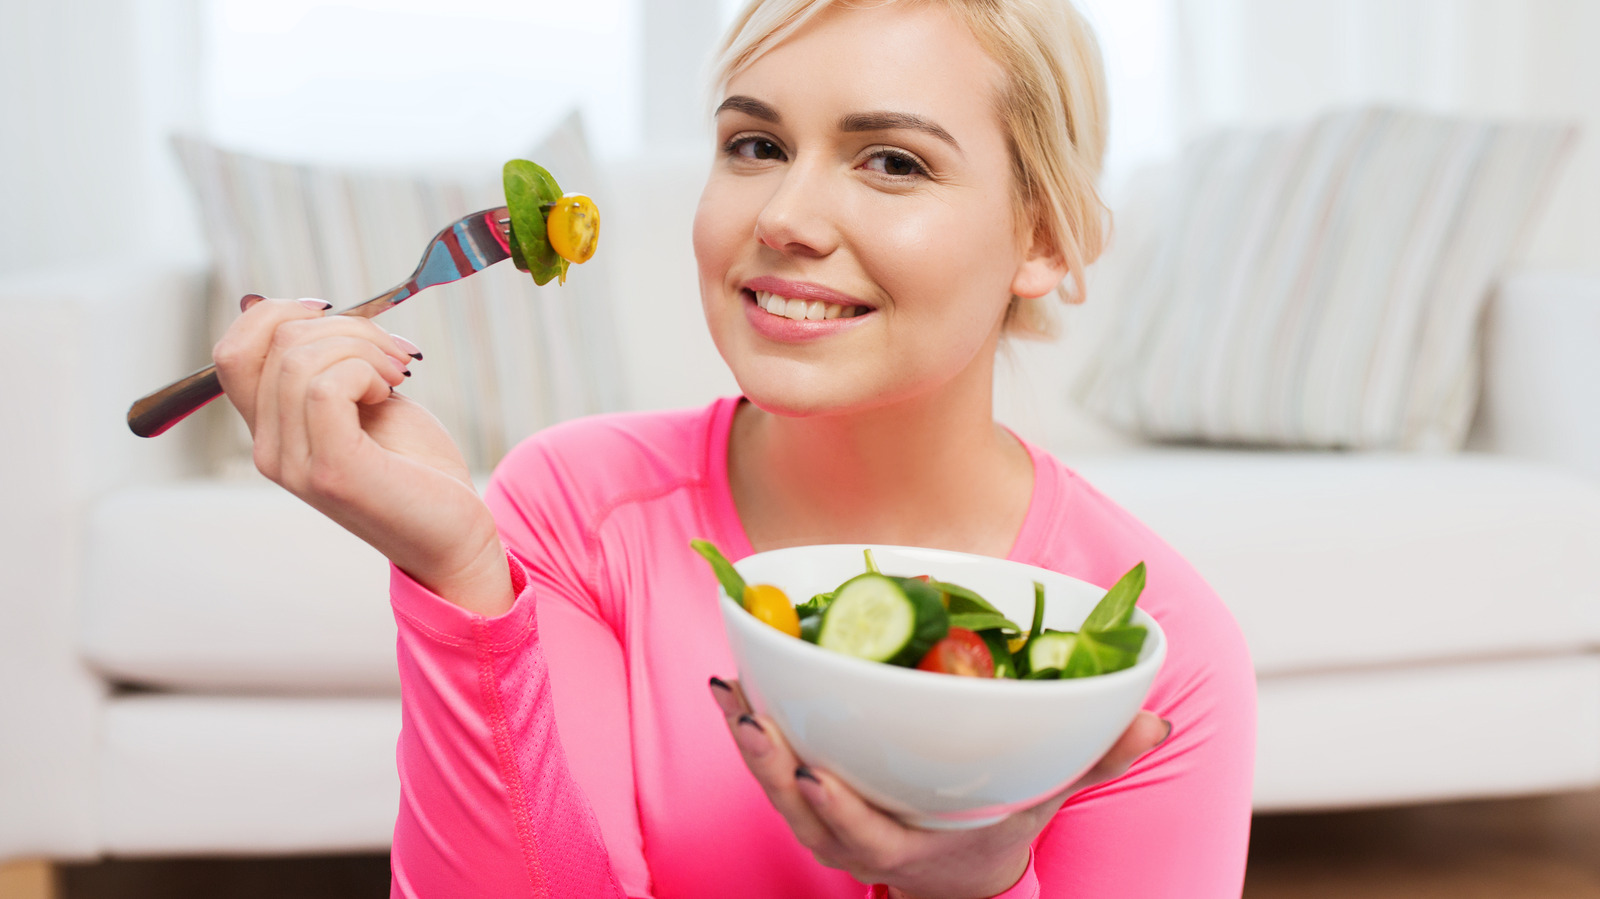 https://www.healthdigest.com/img/gallery/when-you-only-eat-salad-every-day-heres-what-happens-to-your-body/l-intro-1654177895.jpg